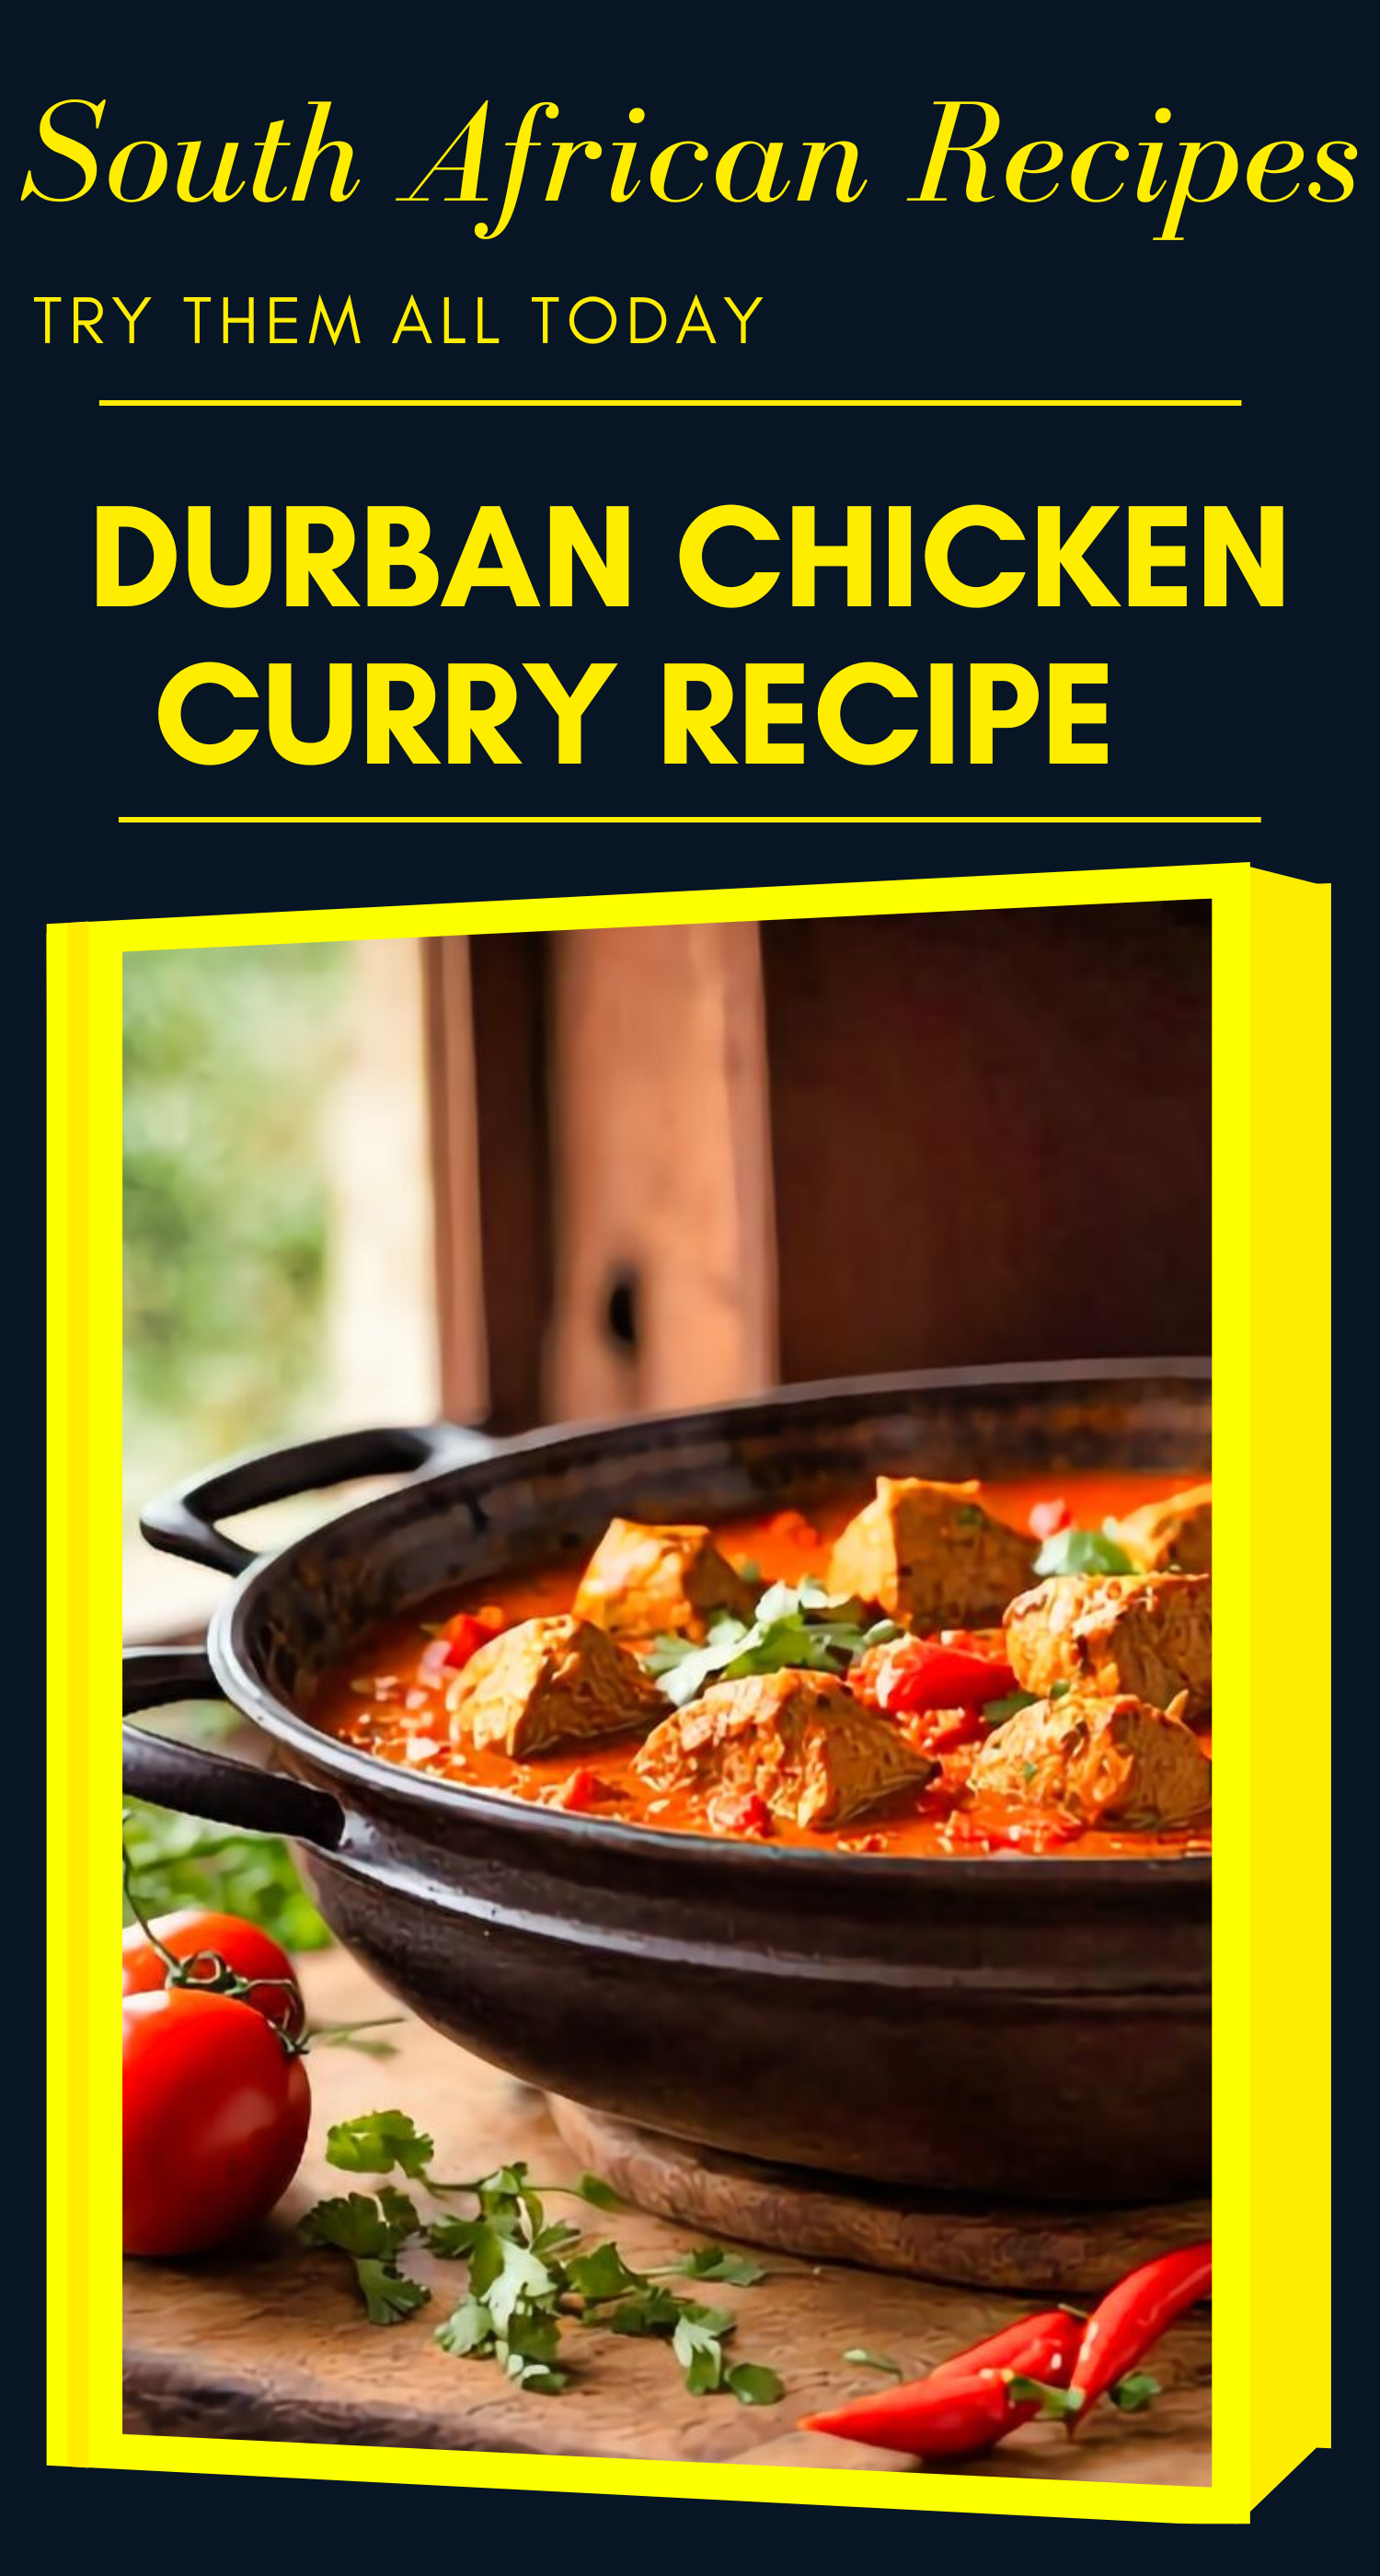 South African Durban Chicken Curry recipe